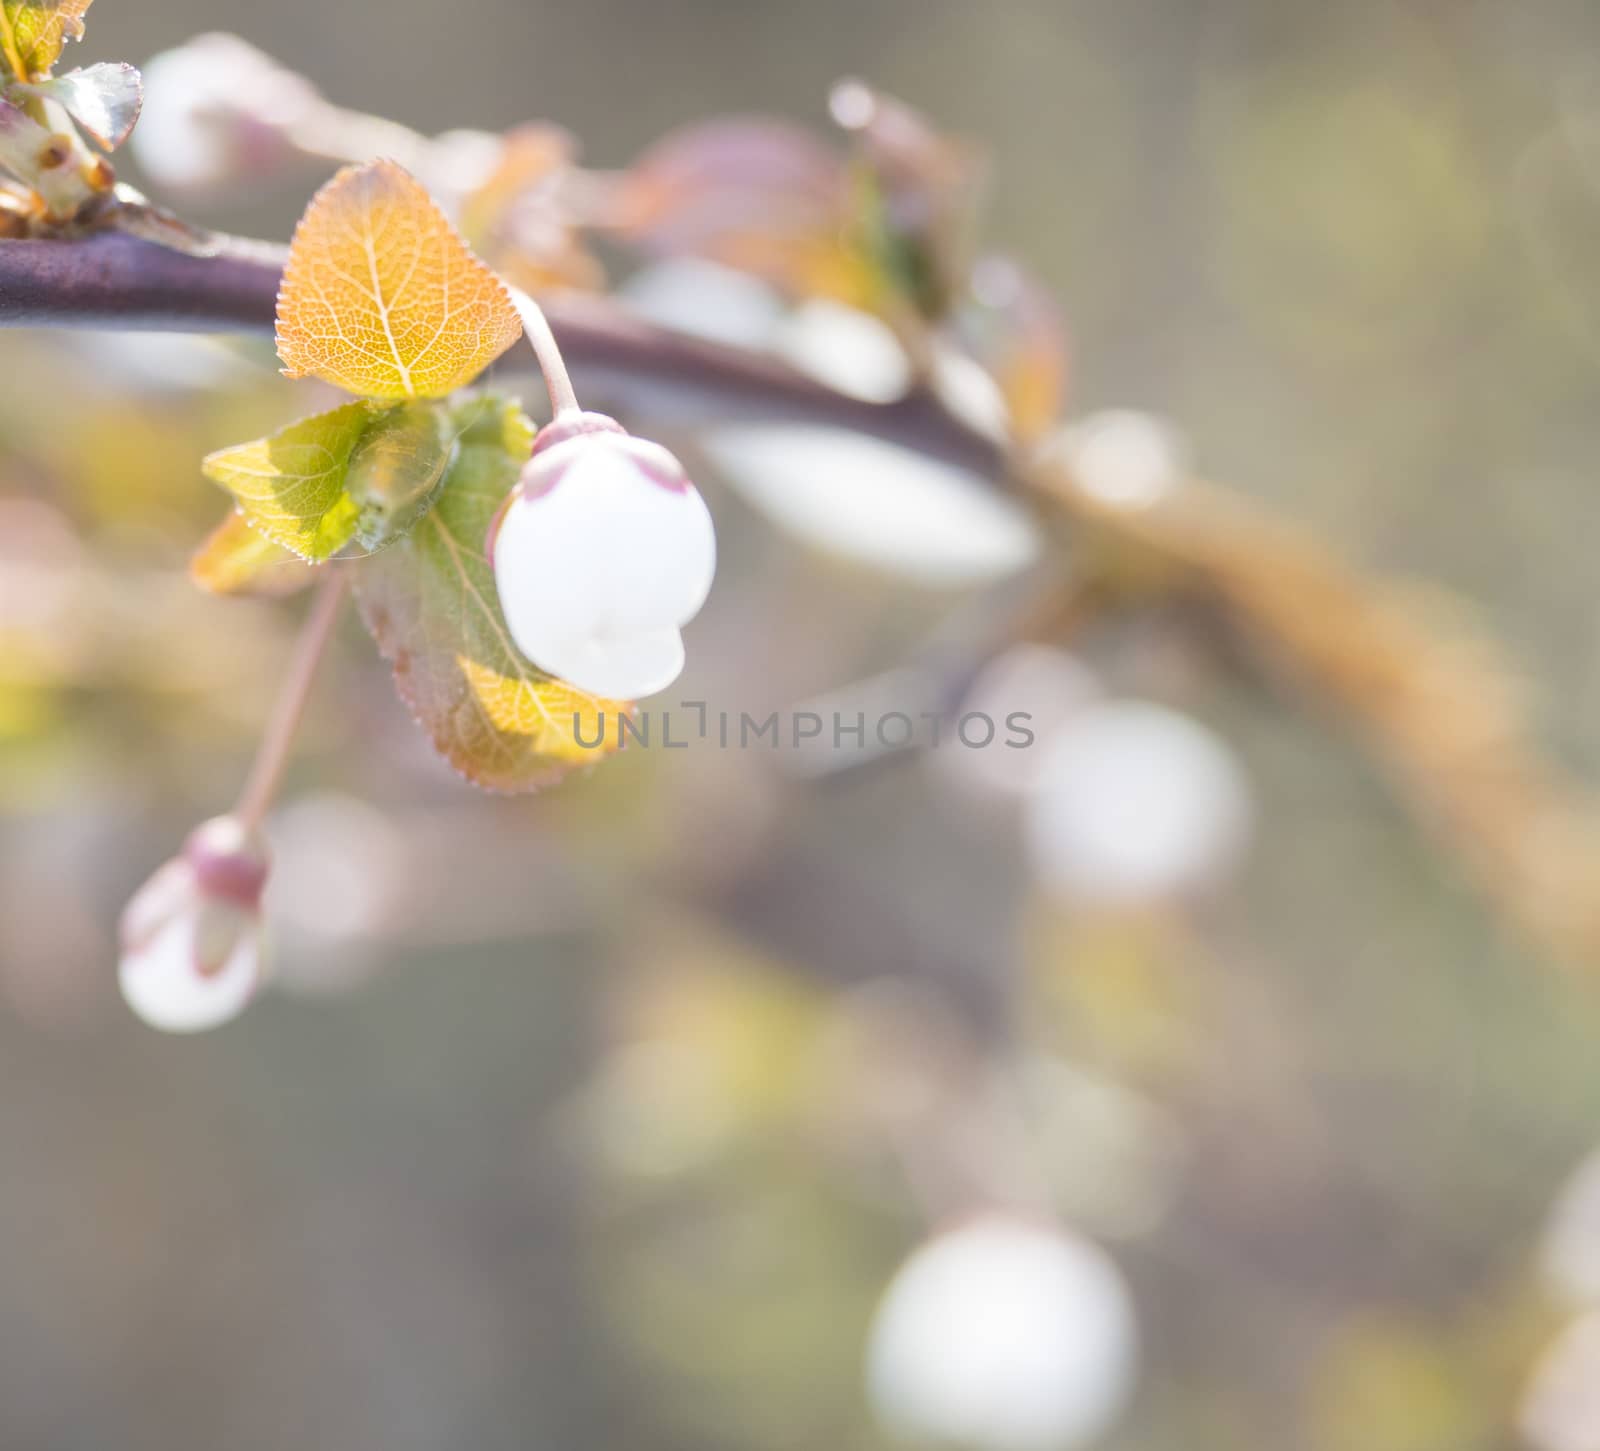 close up beautiful macro blooming pink apple blossom bud flower twing with leaves, sele.ctive focus, natural bokeh beige background, copy space